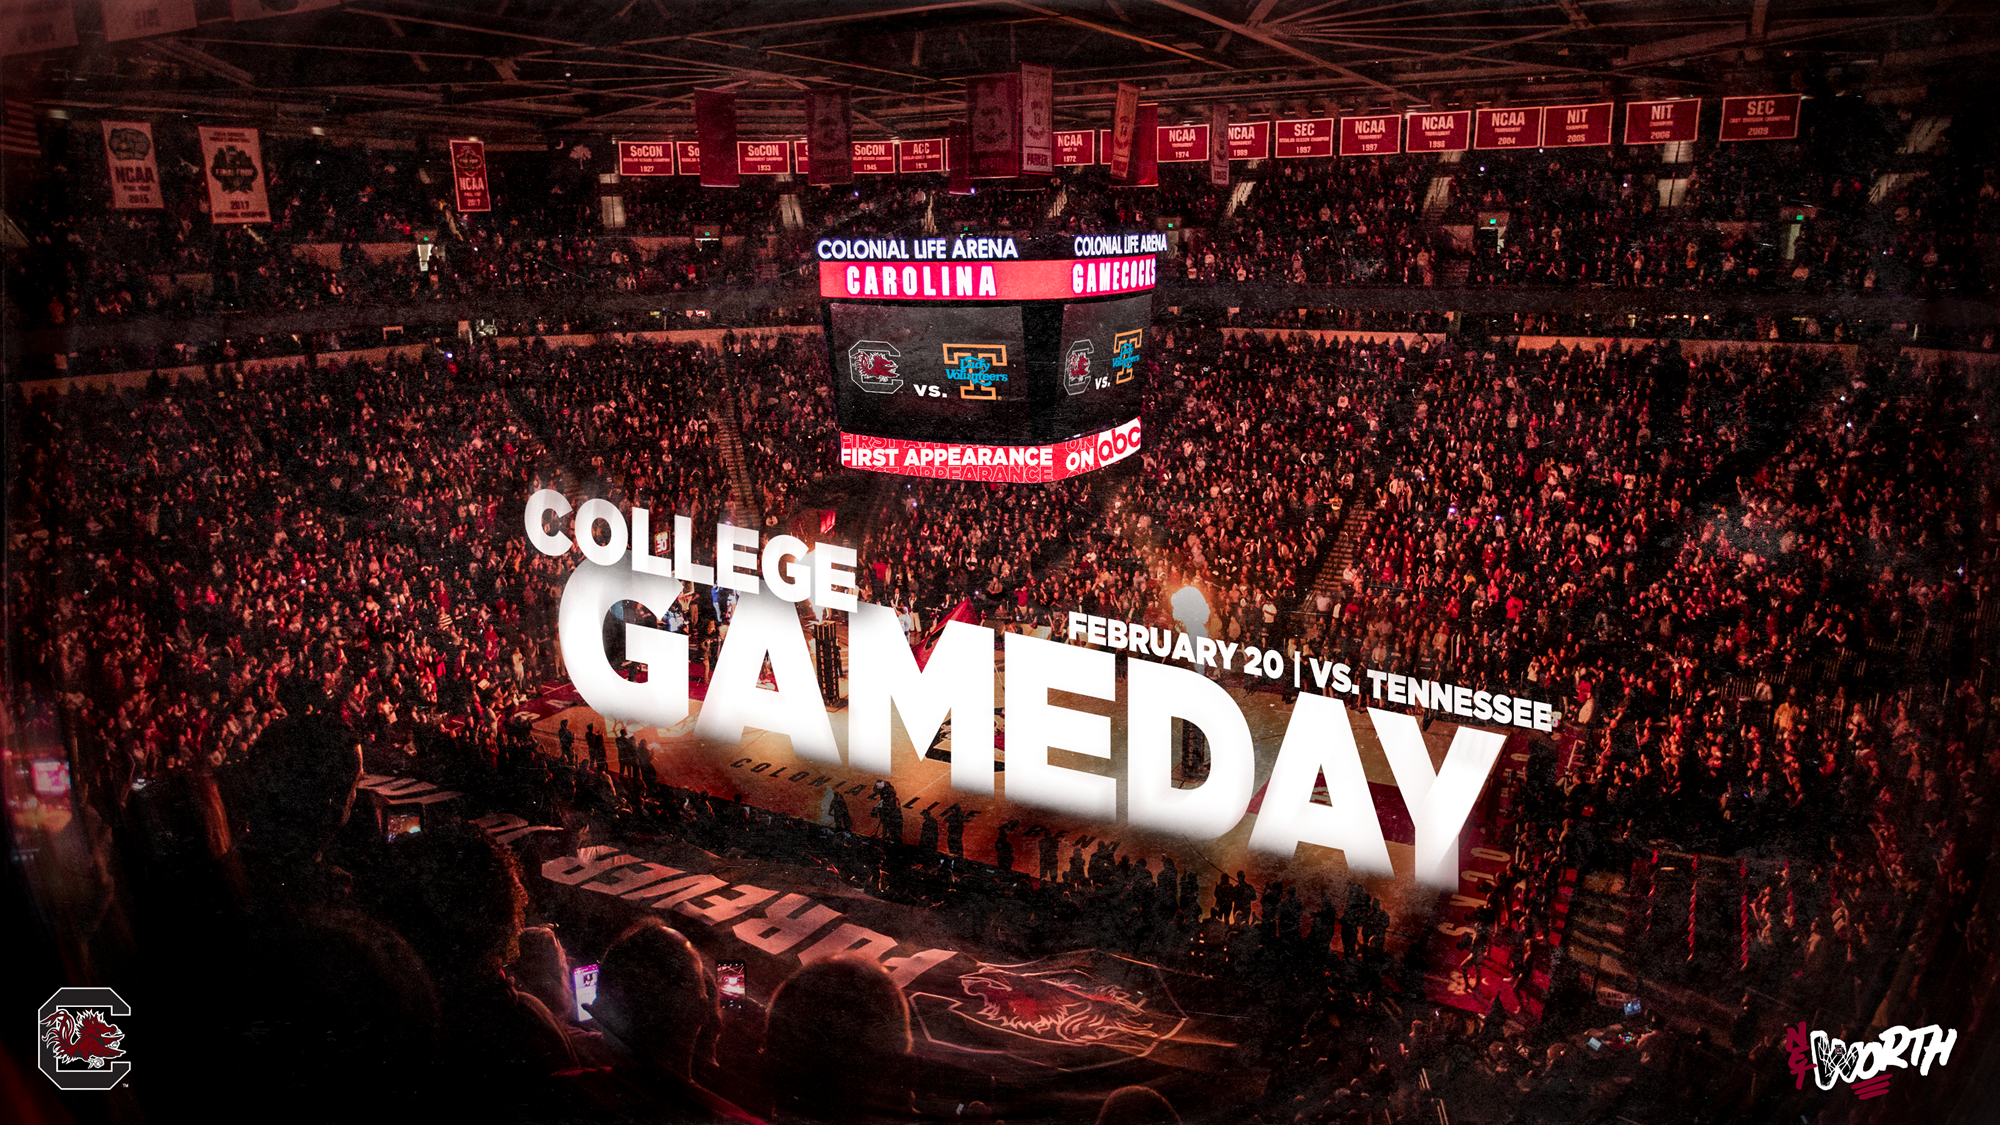 ESPN's College GameDay Coming to Columbia Feb. 20